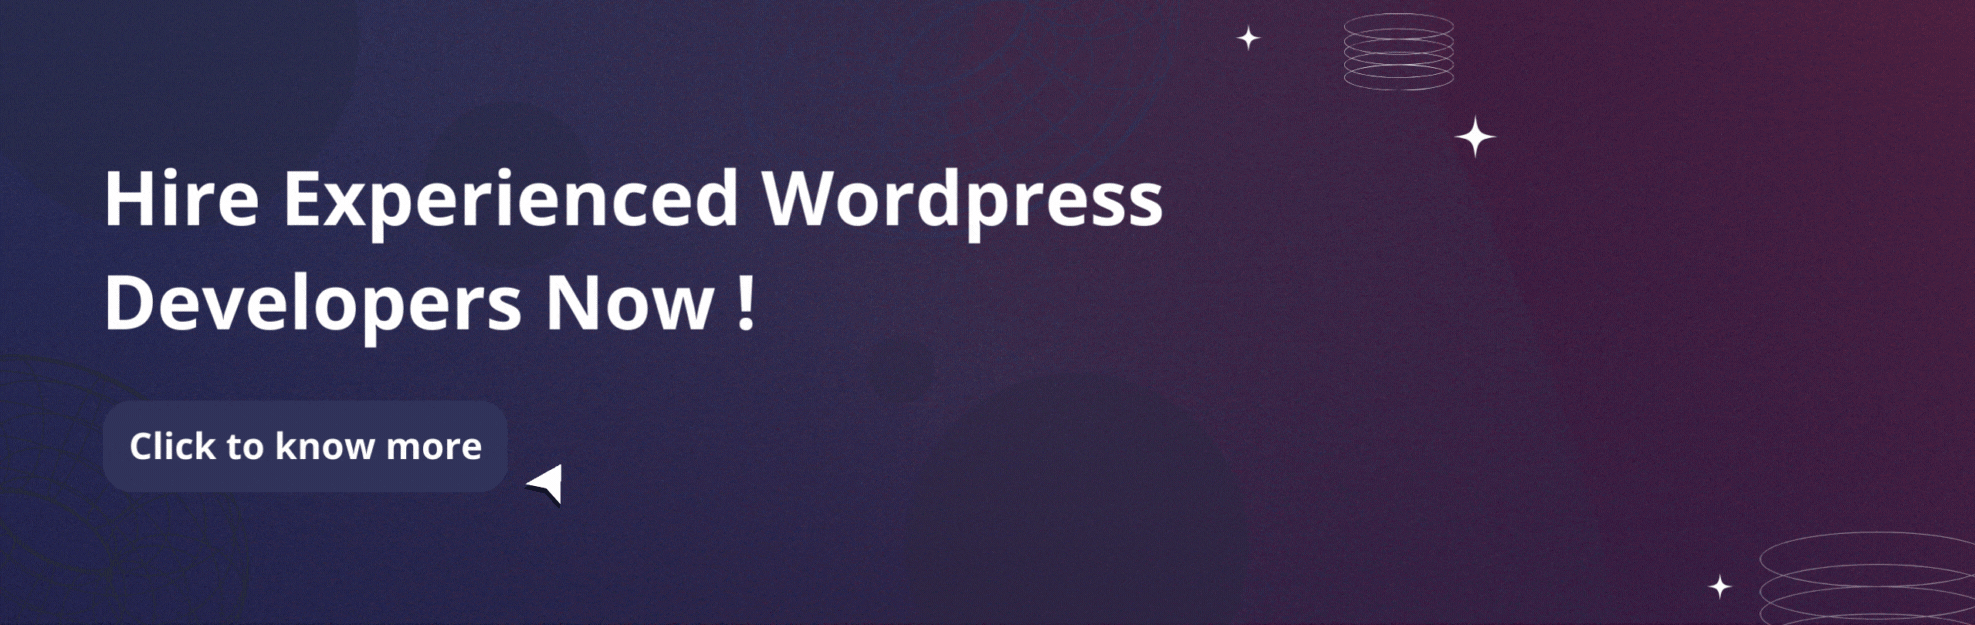 Hire Experienced WordPress Developers Now! 